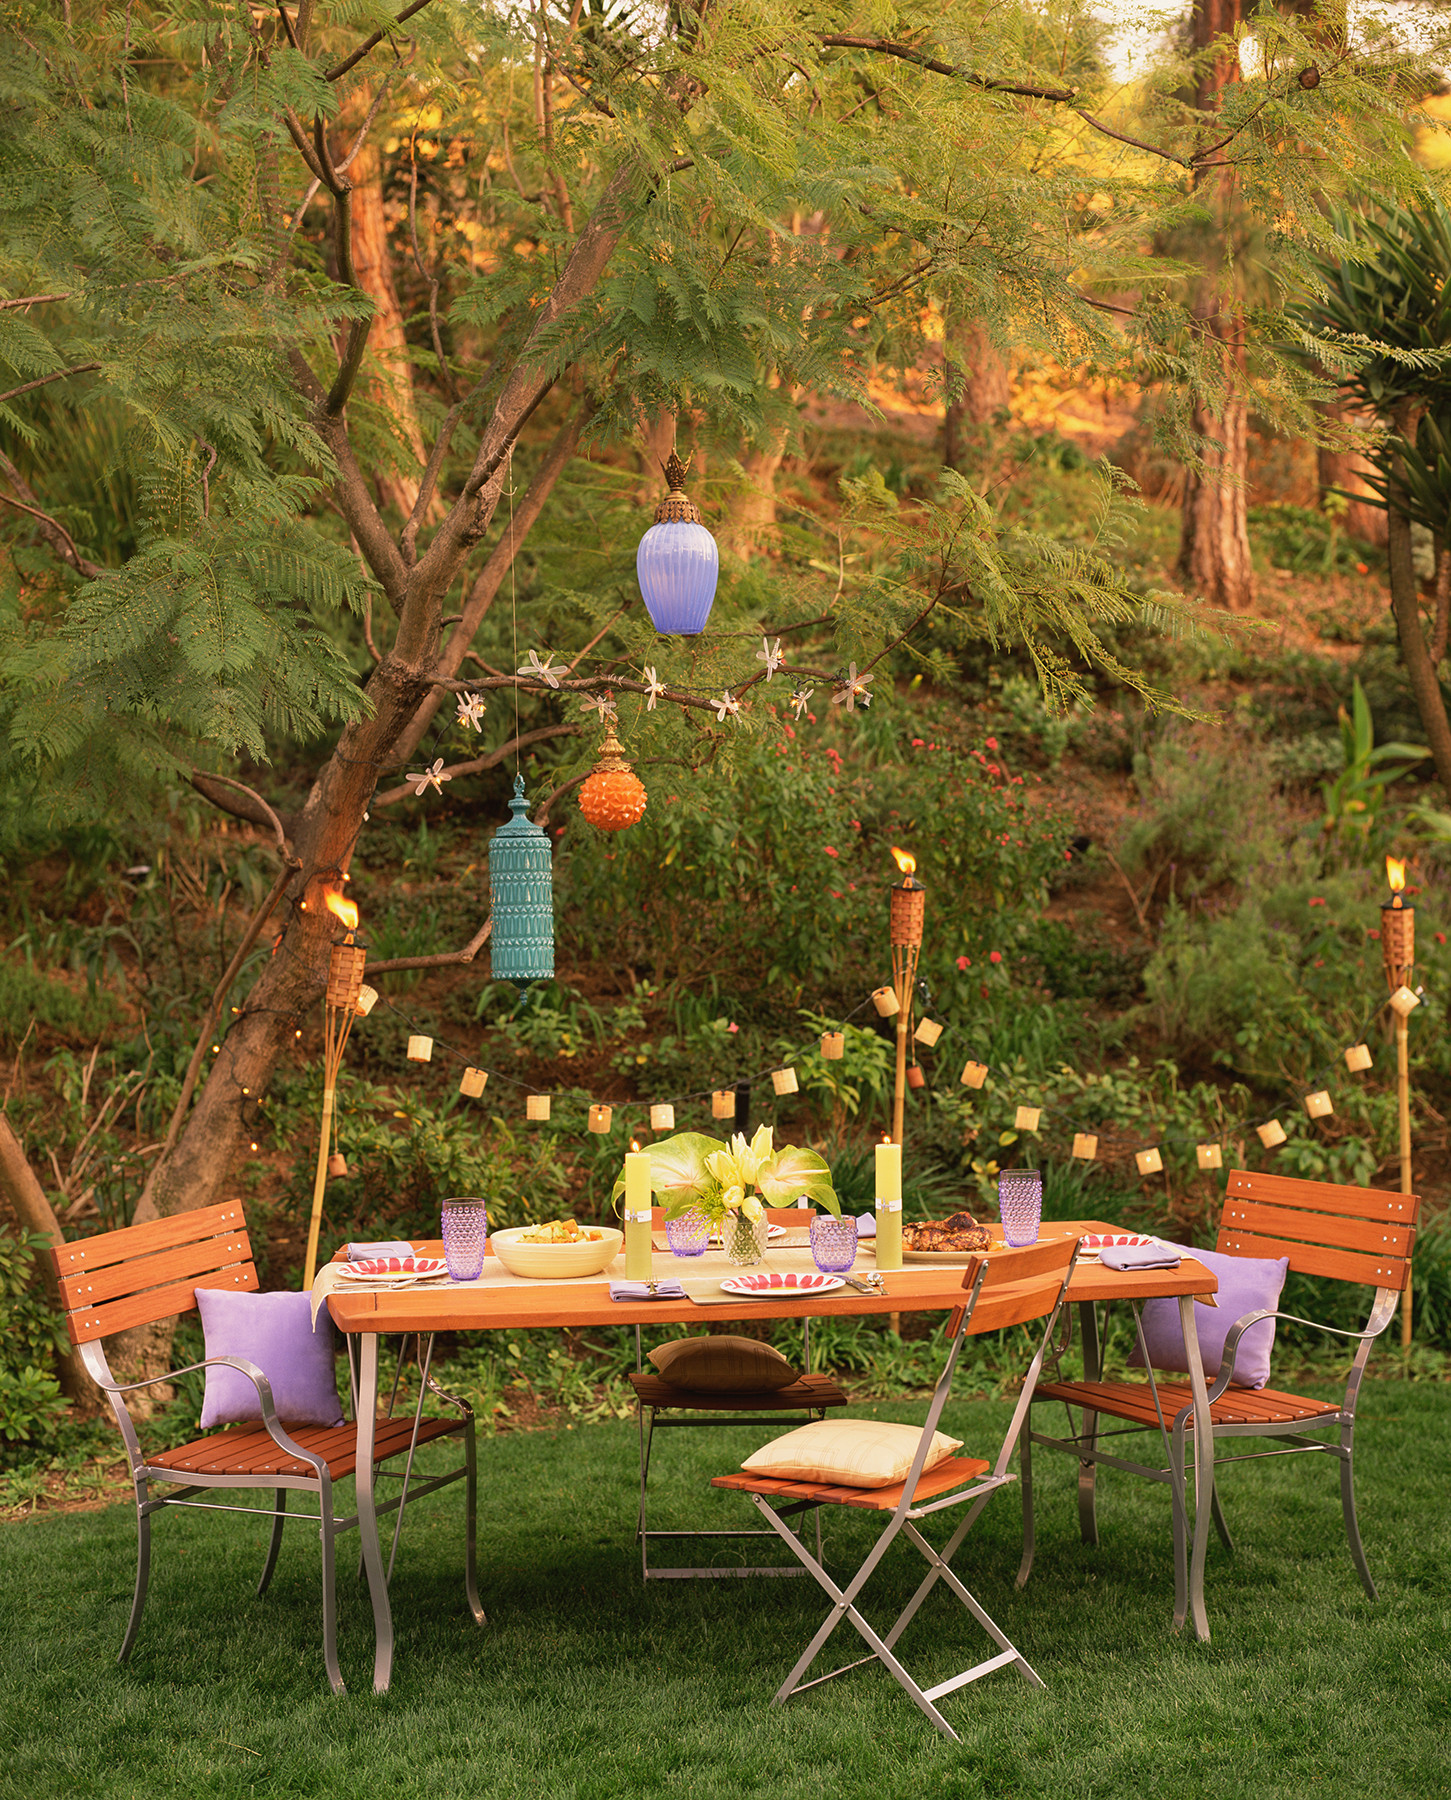 Outdoor Lighting Ideas For Backyard Party
 17 Outdoor Party Ideas for an Effortless Backyard